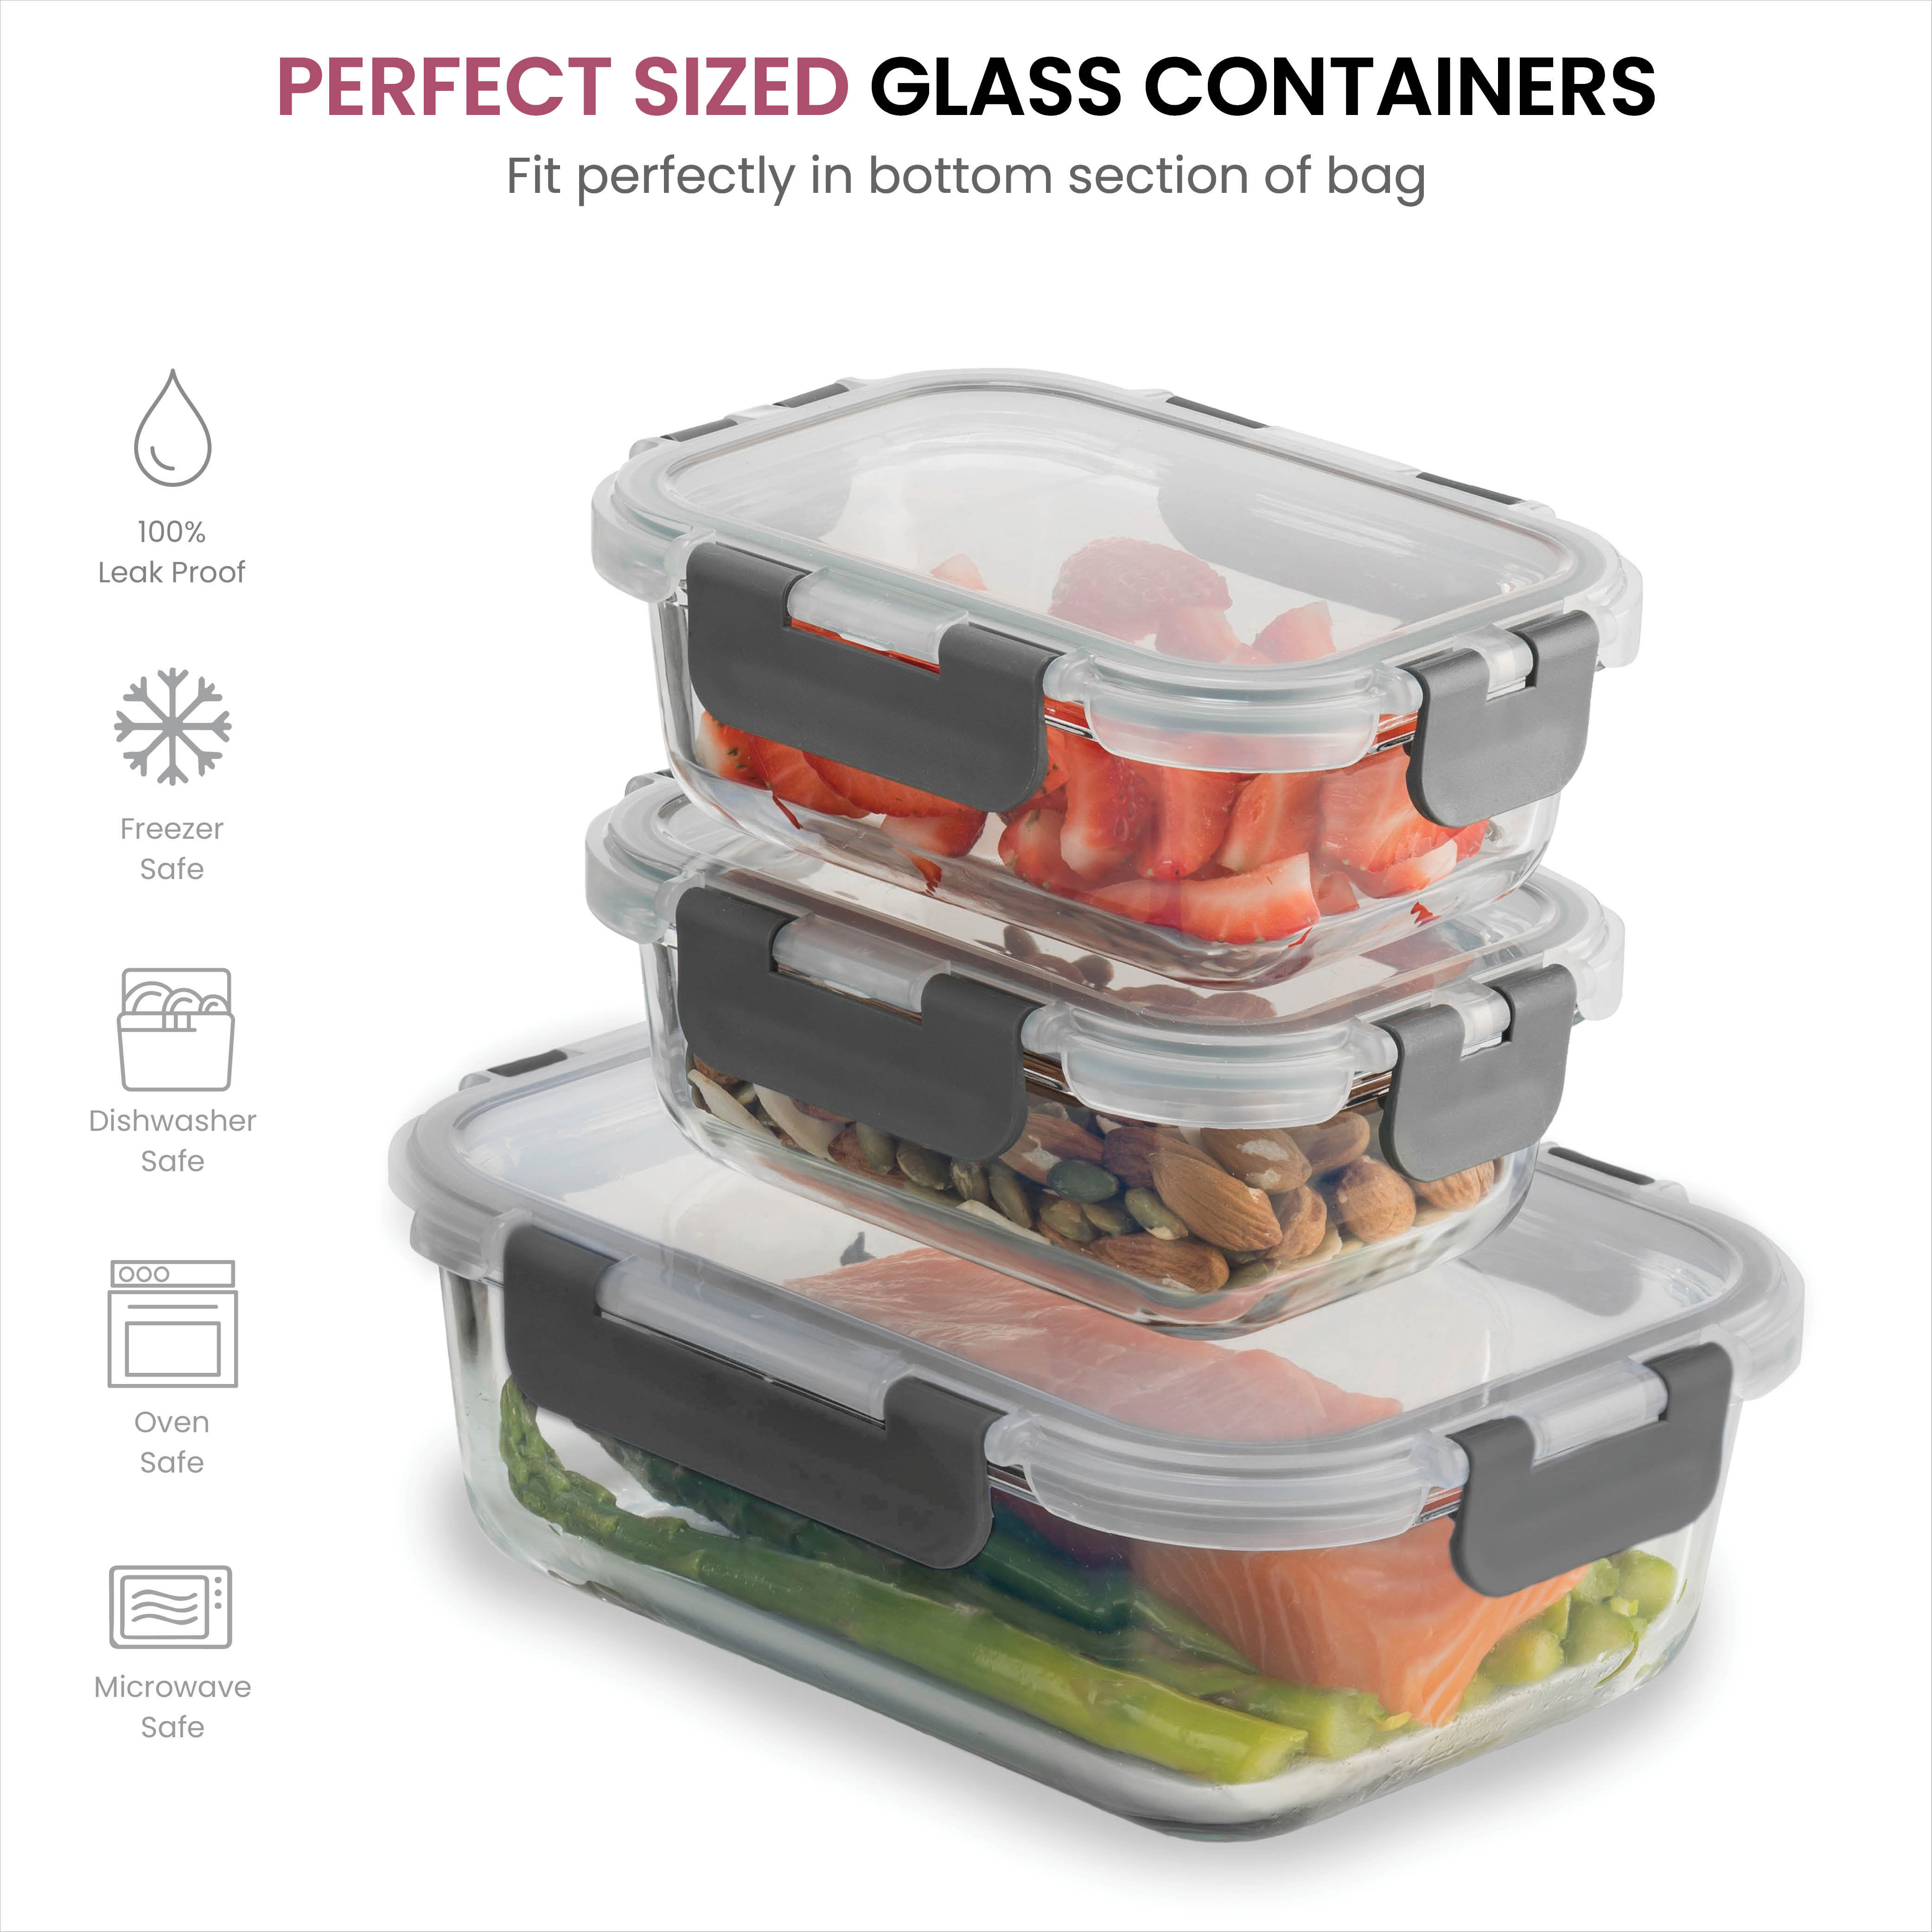 FineDine 6-Piece Superior Glass Food Storage Containers Set, 32oz Capacity  - Newly Innovated Hinged Locking lids - 100% Leakproof Glass Meal-Prep